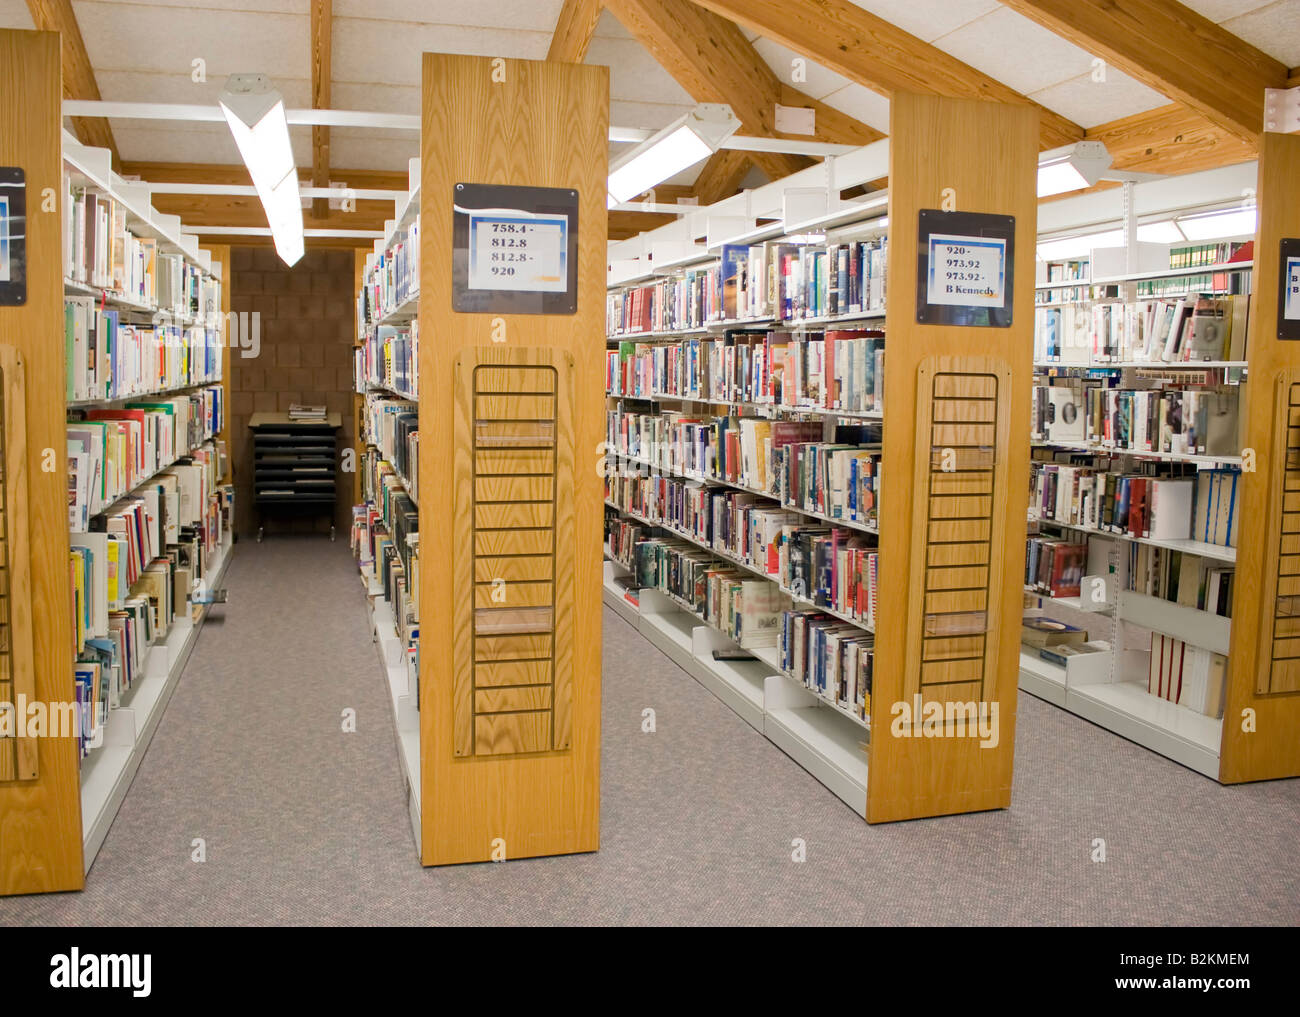 The aisles in a public library with shelves full of books Stock Photo